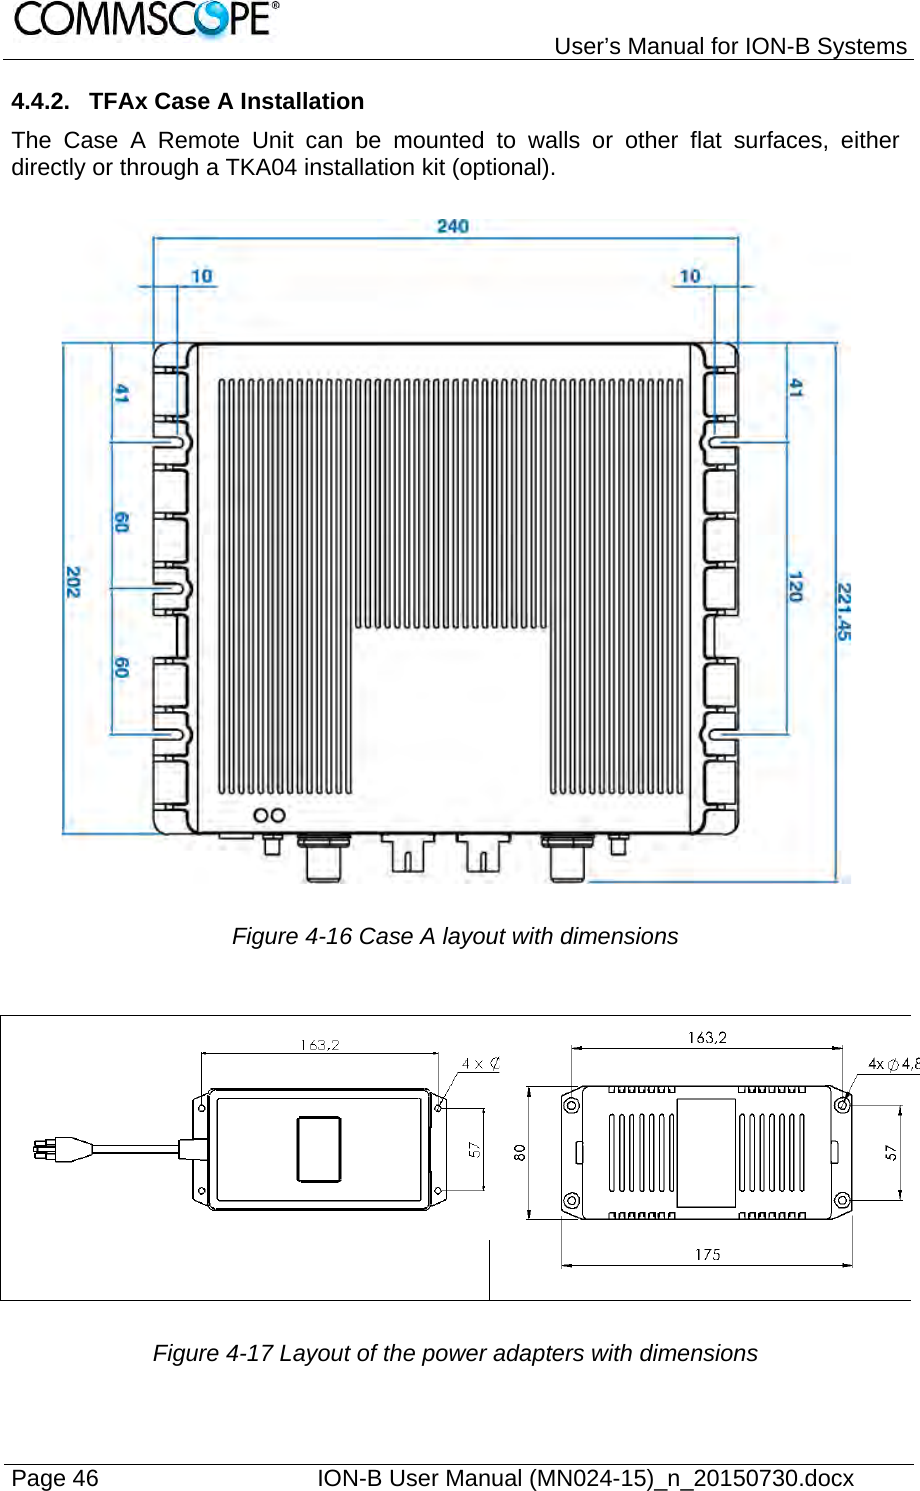   User’s Manual for ION-B Systems Page 46    ION-B User Manual (MN024-15)_n_20150730.docx  4.4.2.  TFAx Case A Installation The Case A Remote Unit can be mounted to walls or other flat surfaces, either directly or through a TKA04 installation kit (optional).    Figure 4-16 Case A layout with dimensions    Figure 4-17 Layout of the power adapters with dimensions 